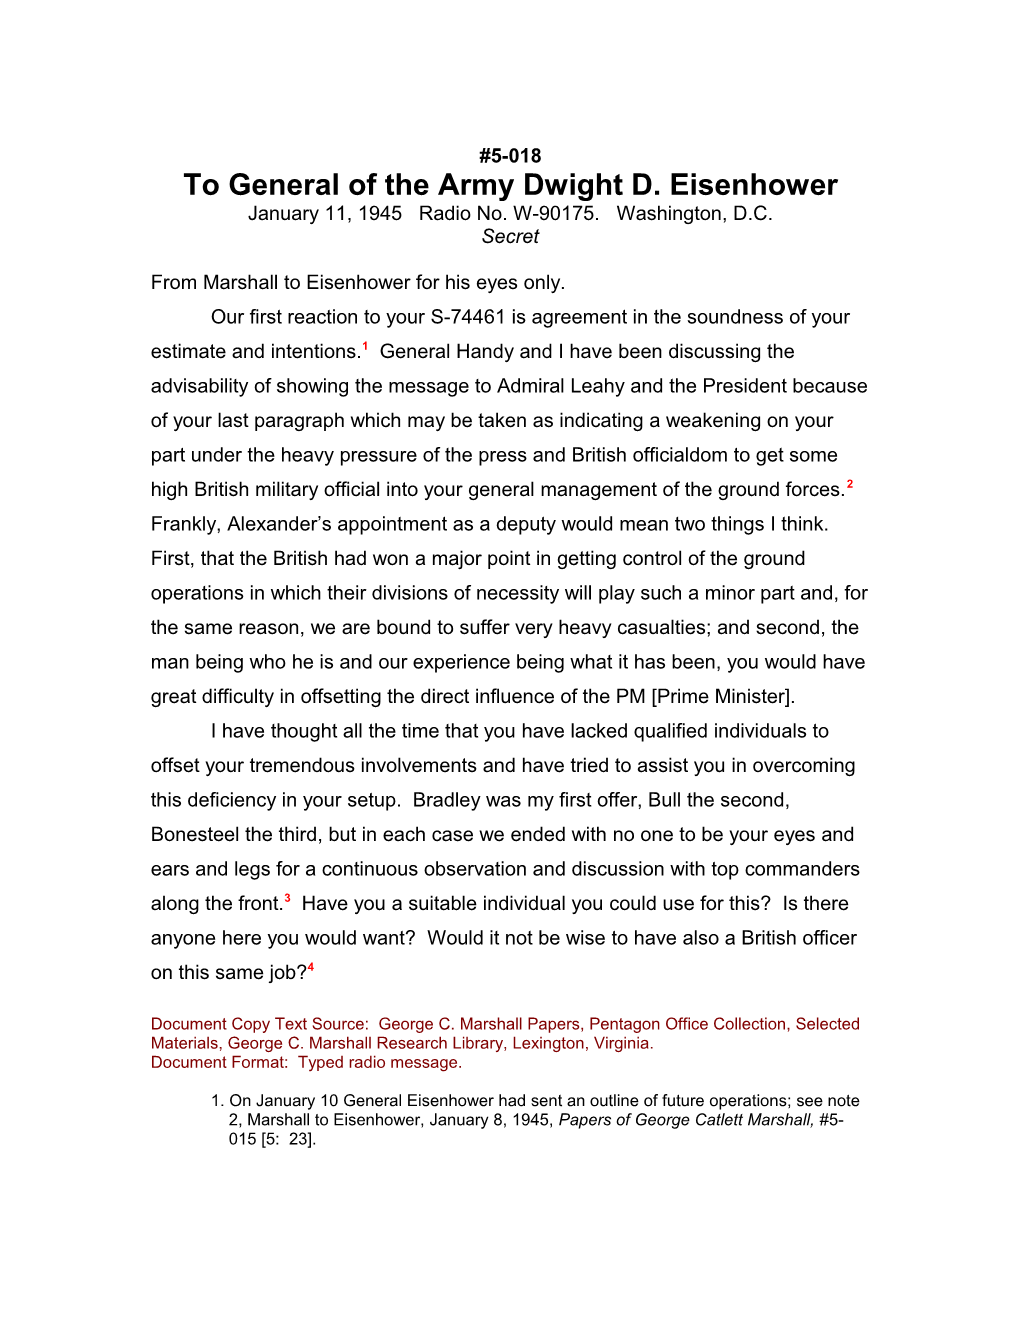 To General of the Army Dwight D. Eisenhower